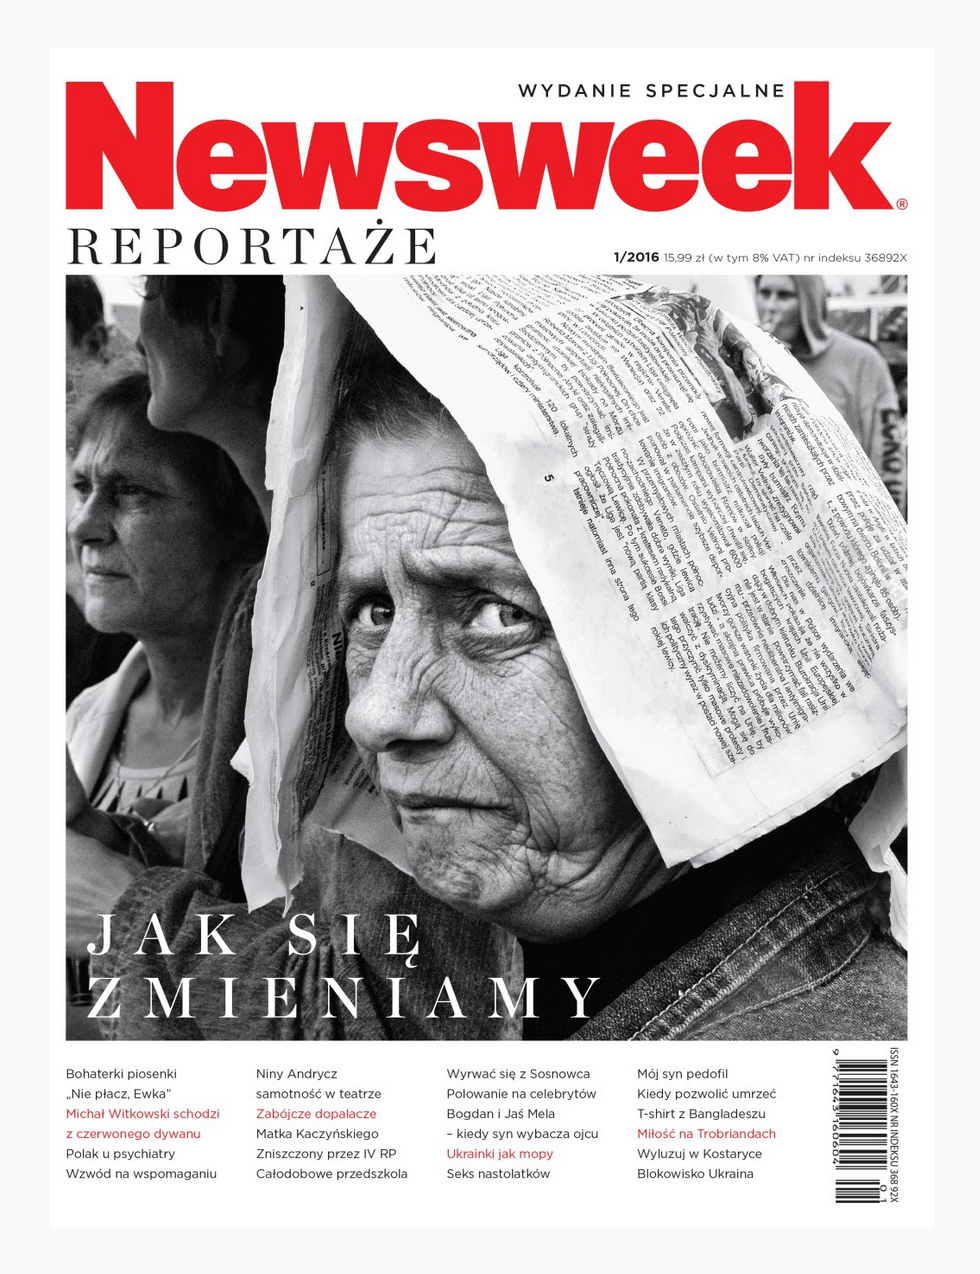 NEWSWEEK - SPECIAL EDITION 1/16